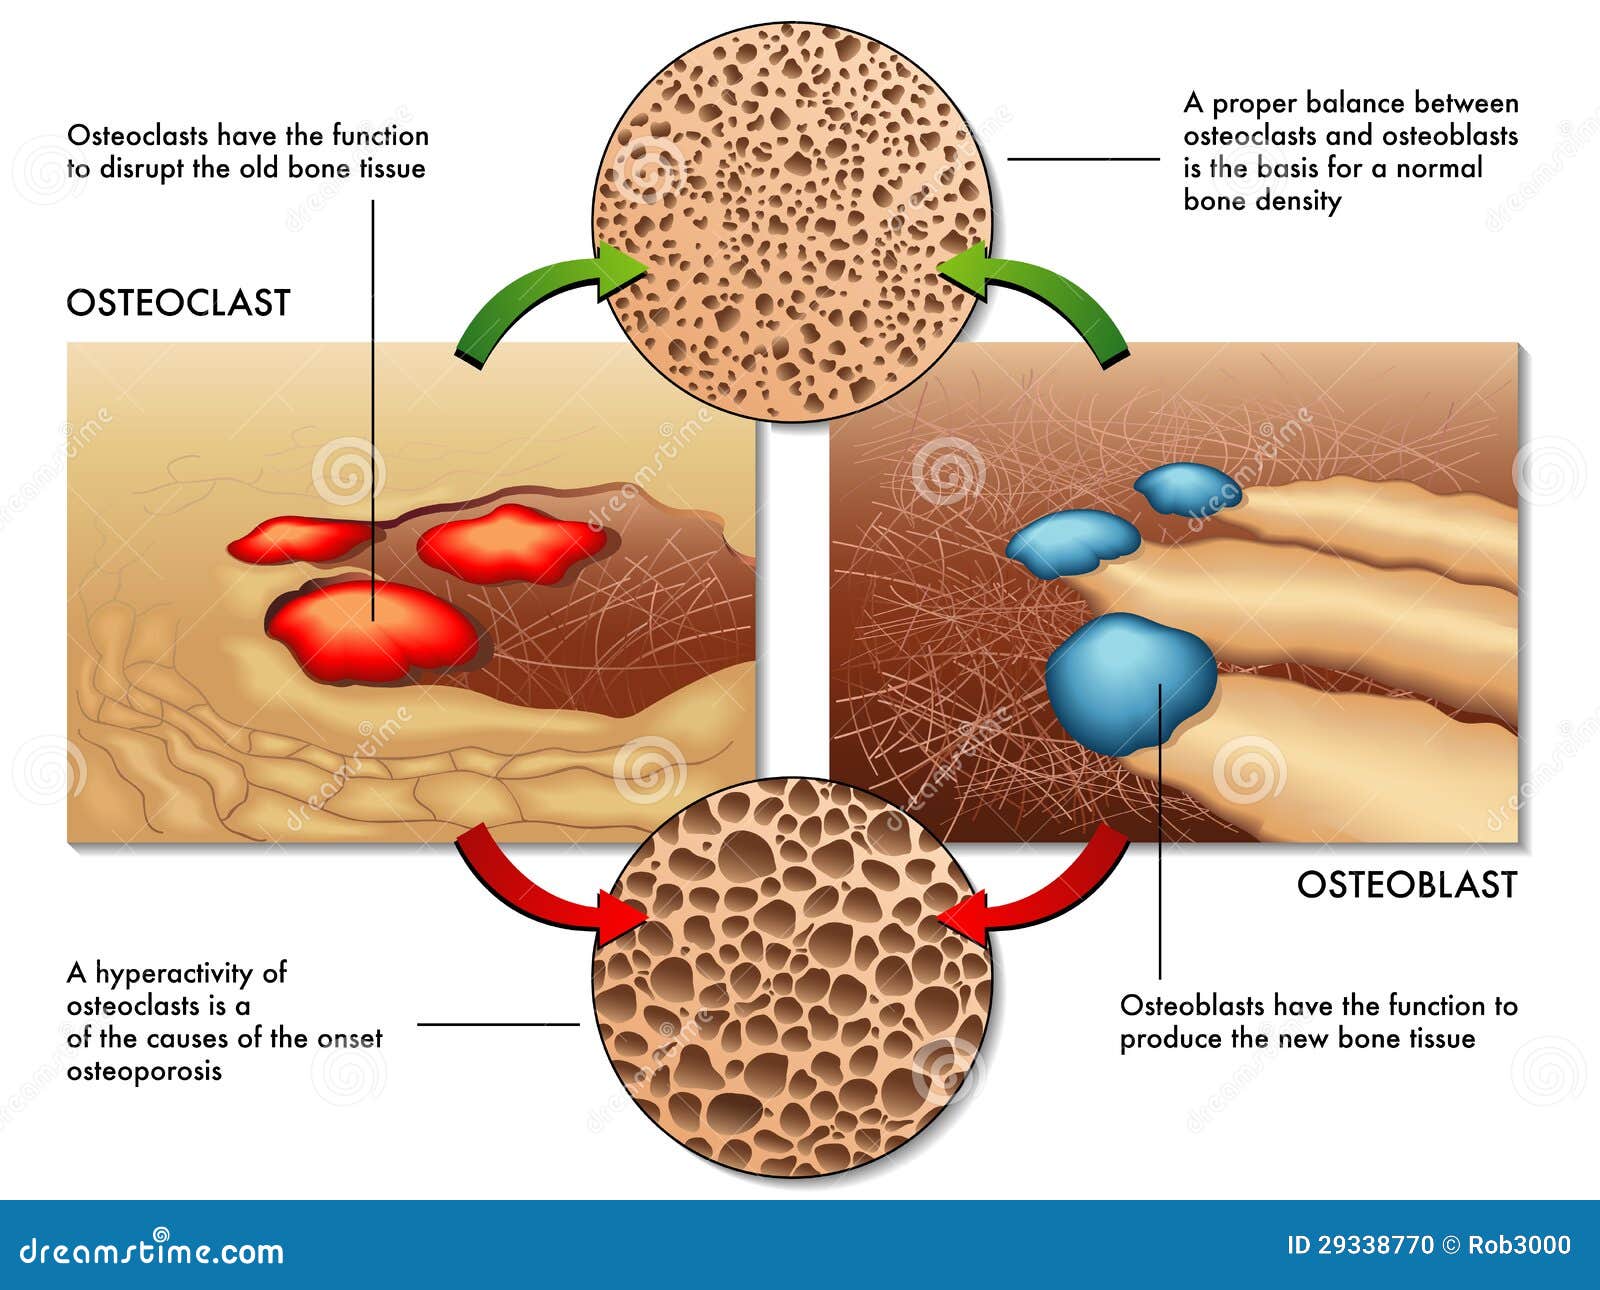 Osteoblast Cartoons, Illustrations & Vector Stock Images - 23 Pictures